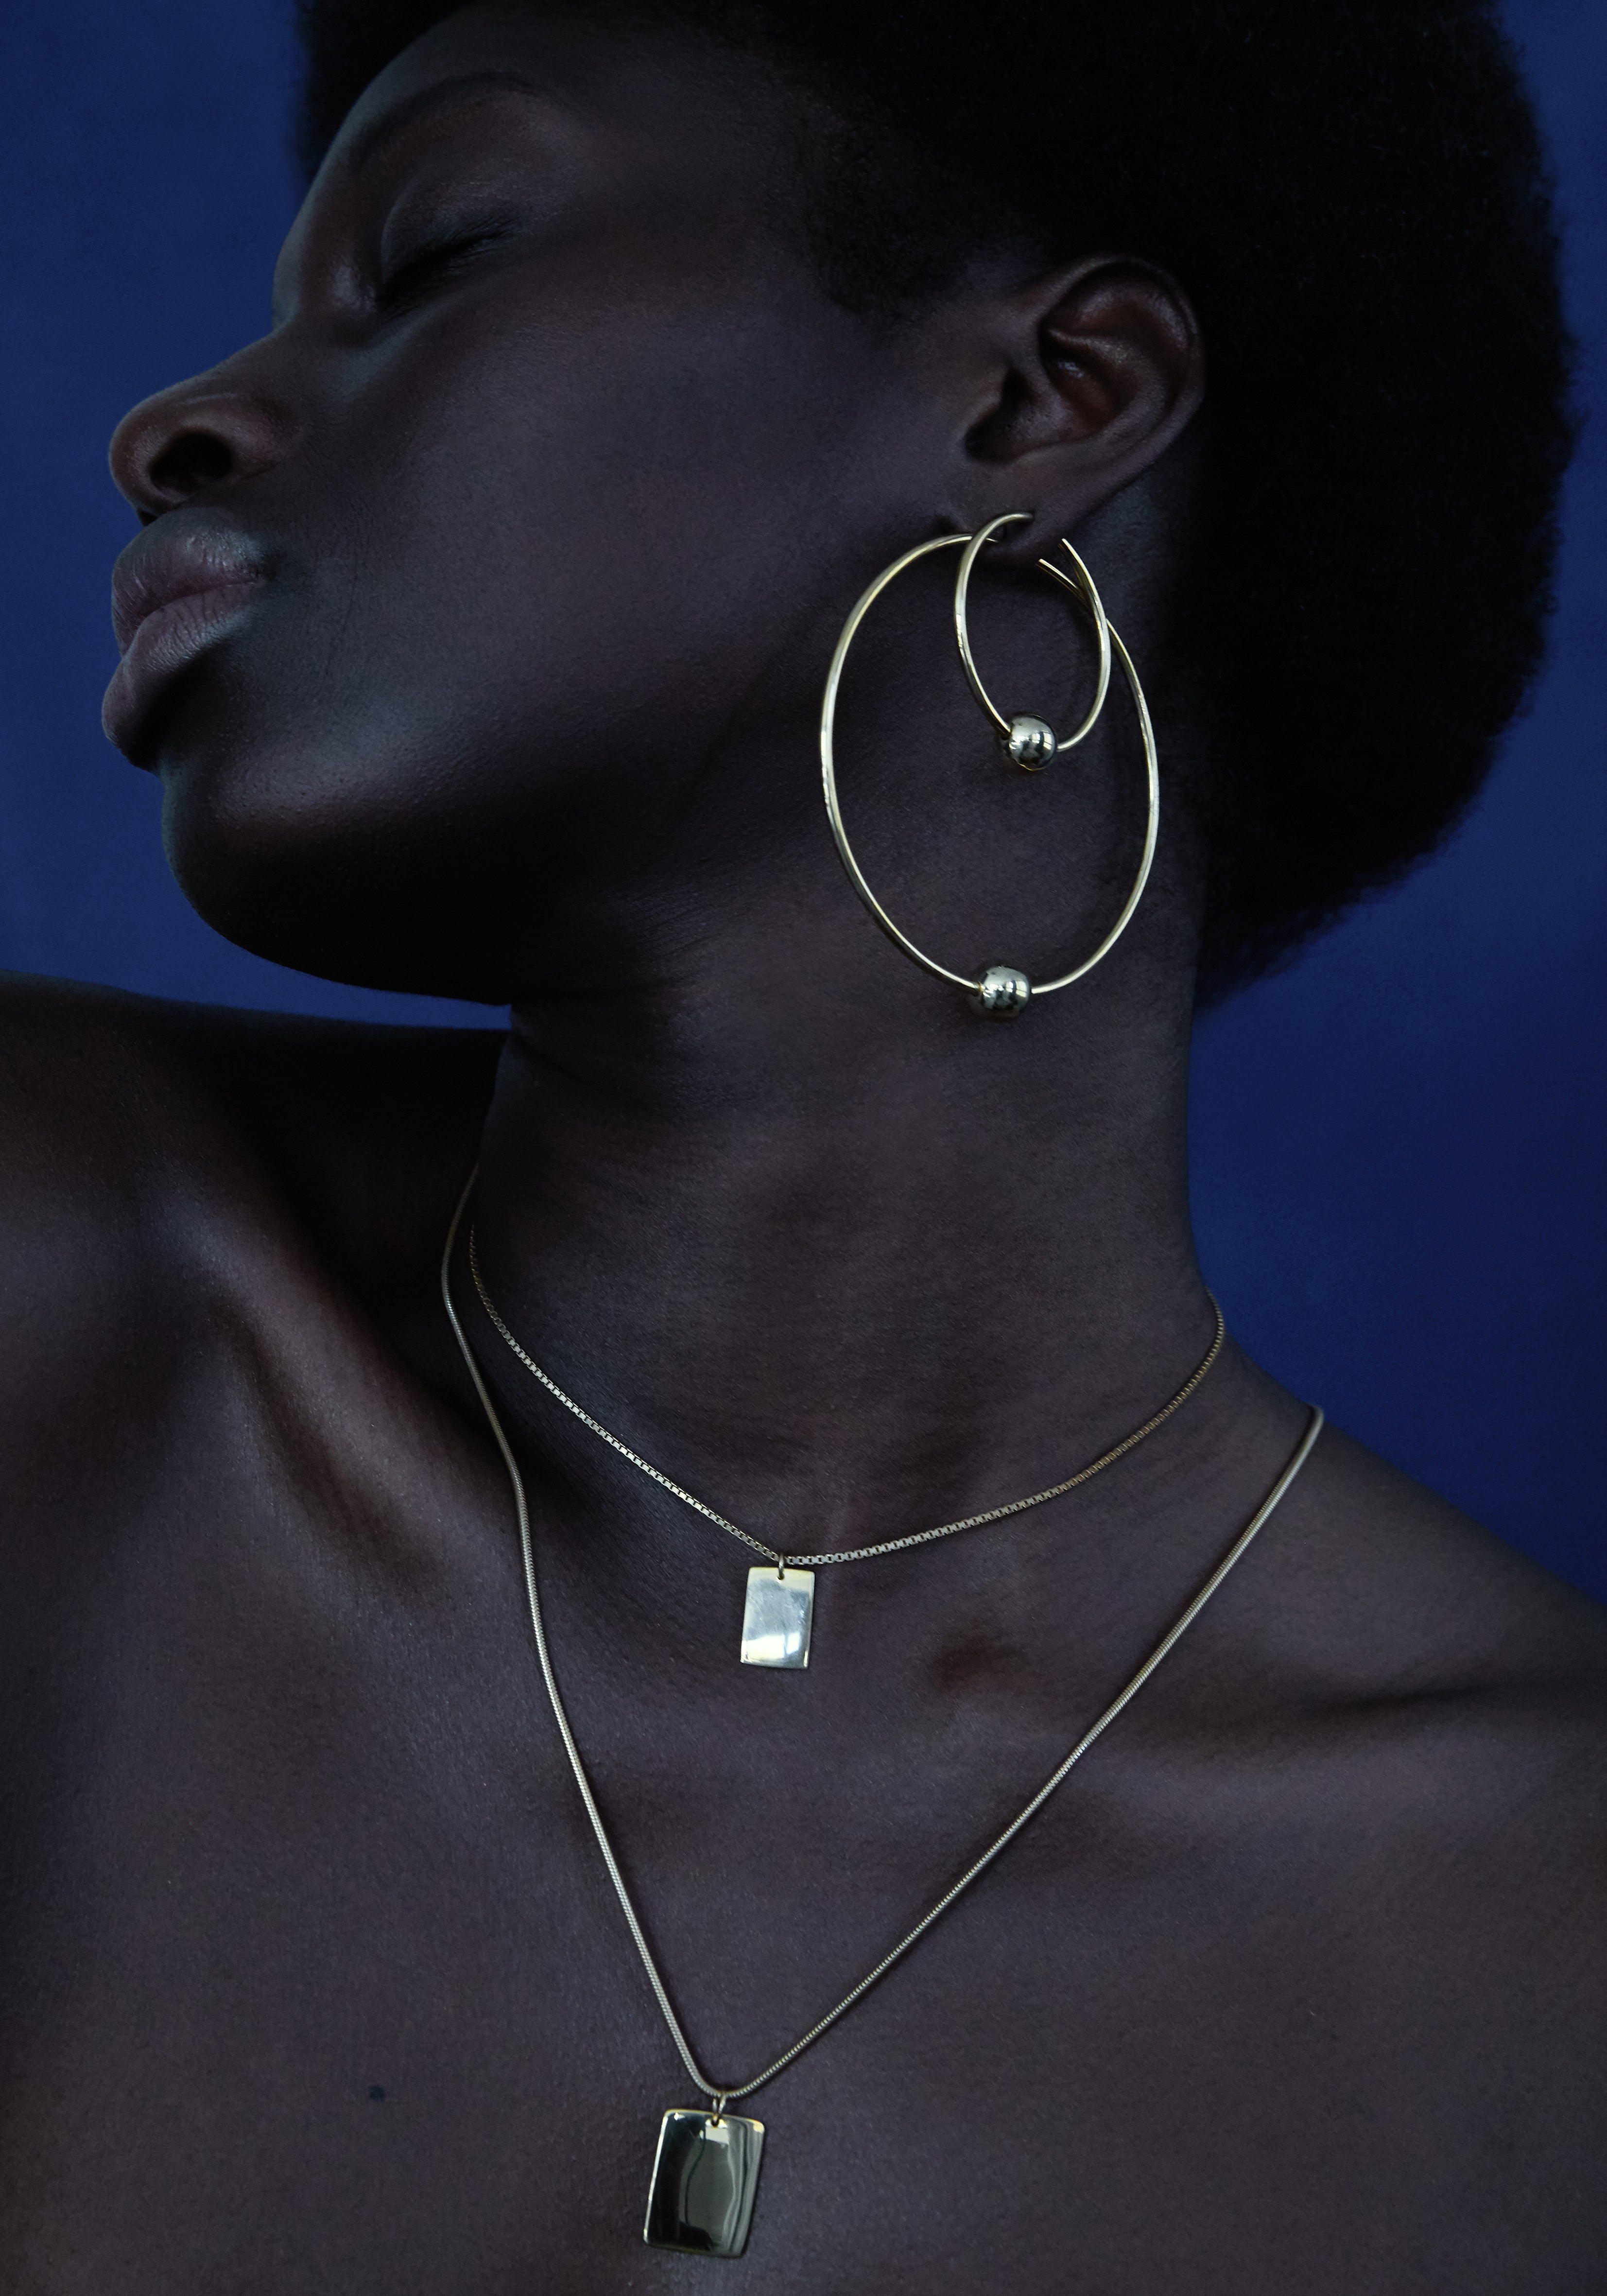 VIKA jewels ethical sustainable jewellery recycled sterling silver jewelry photographed by katia wil berlin